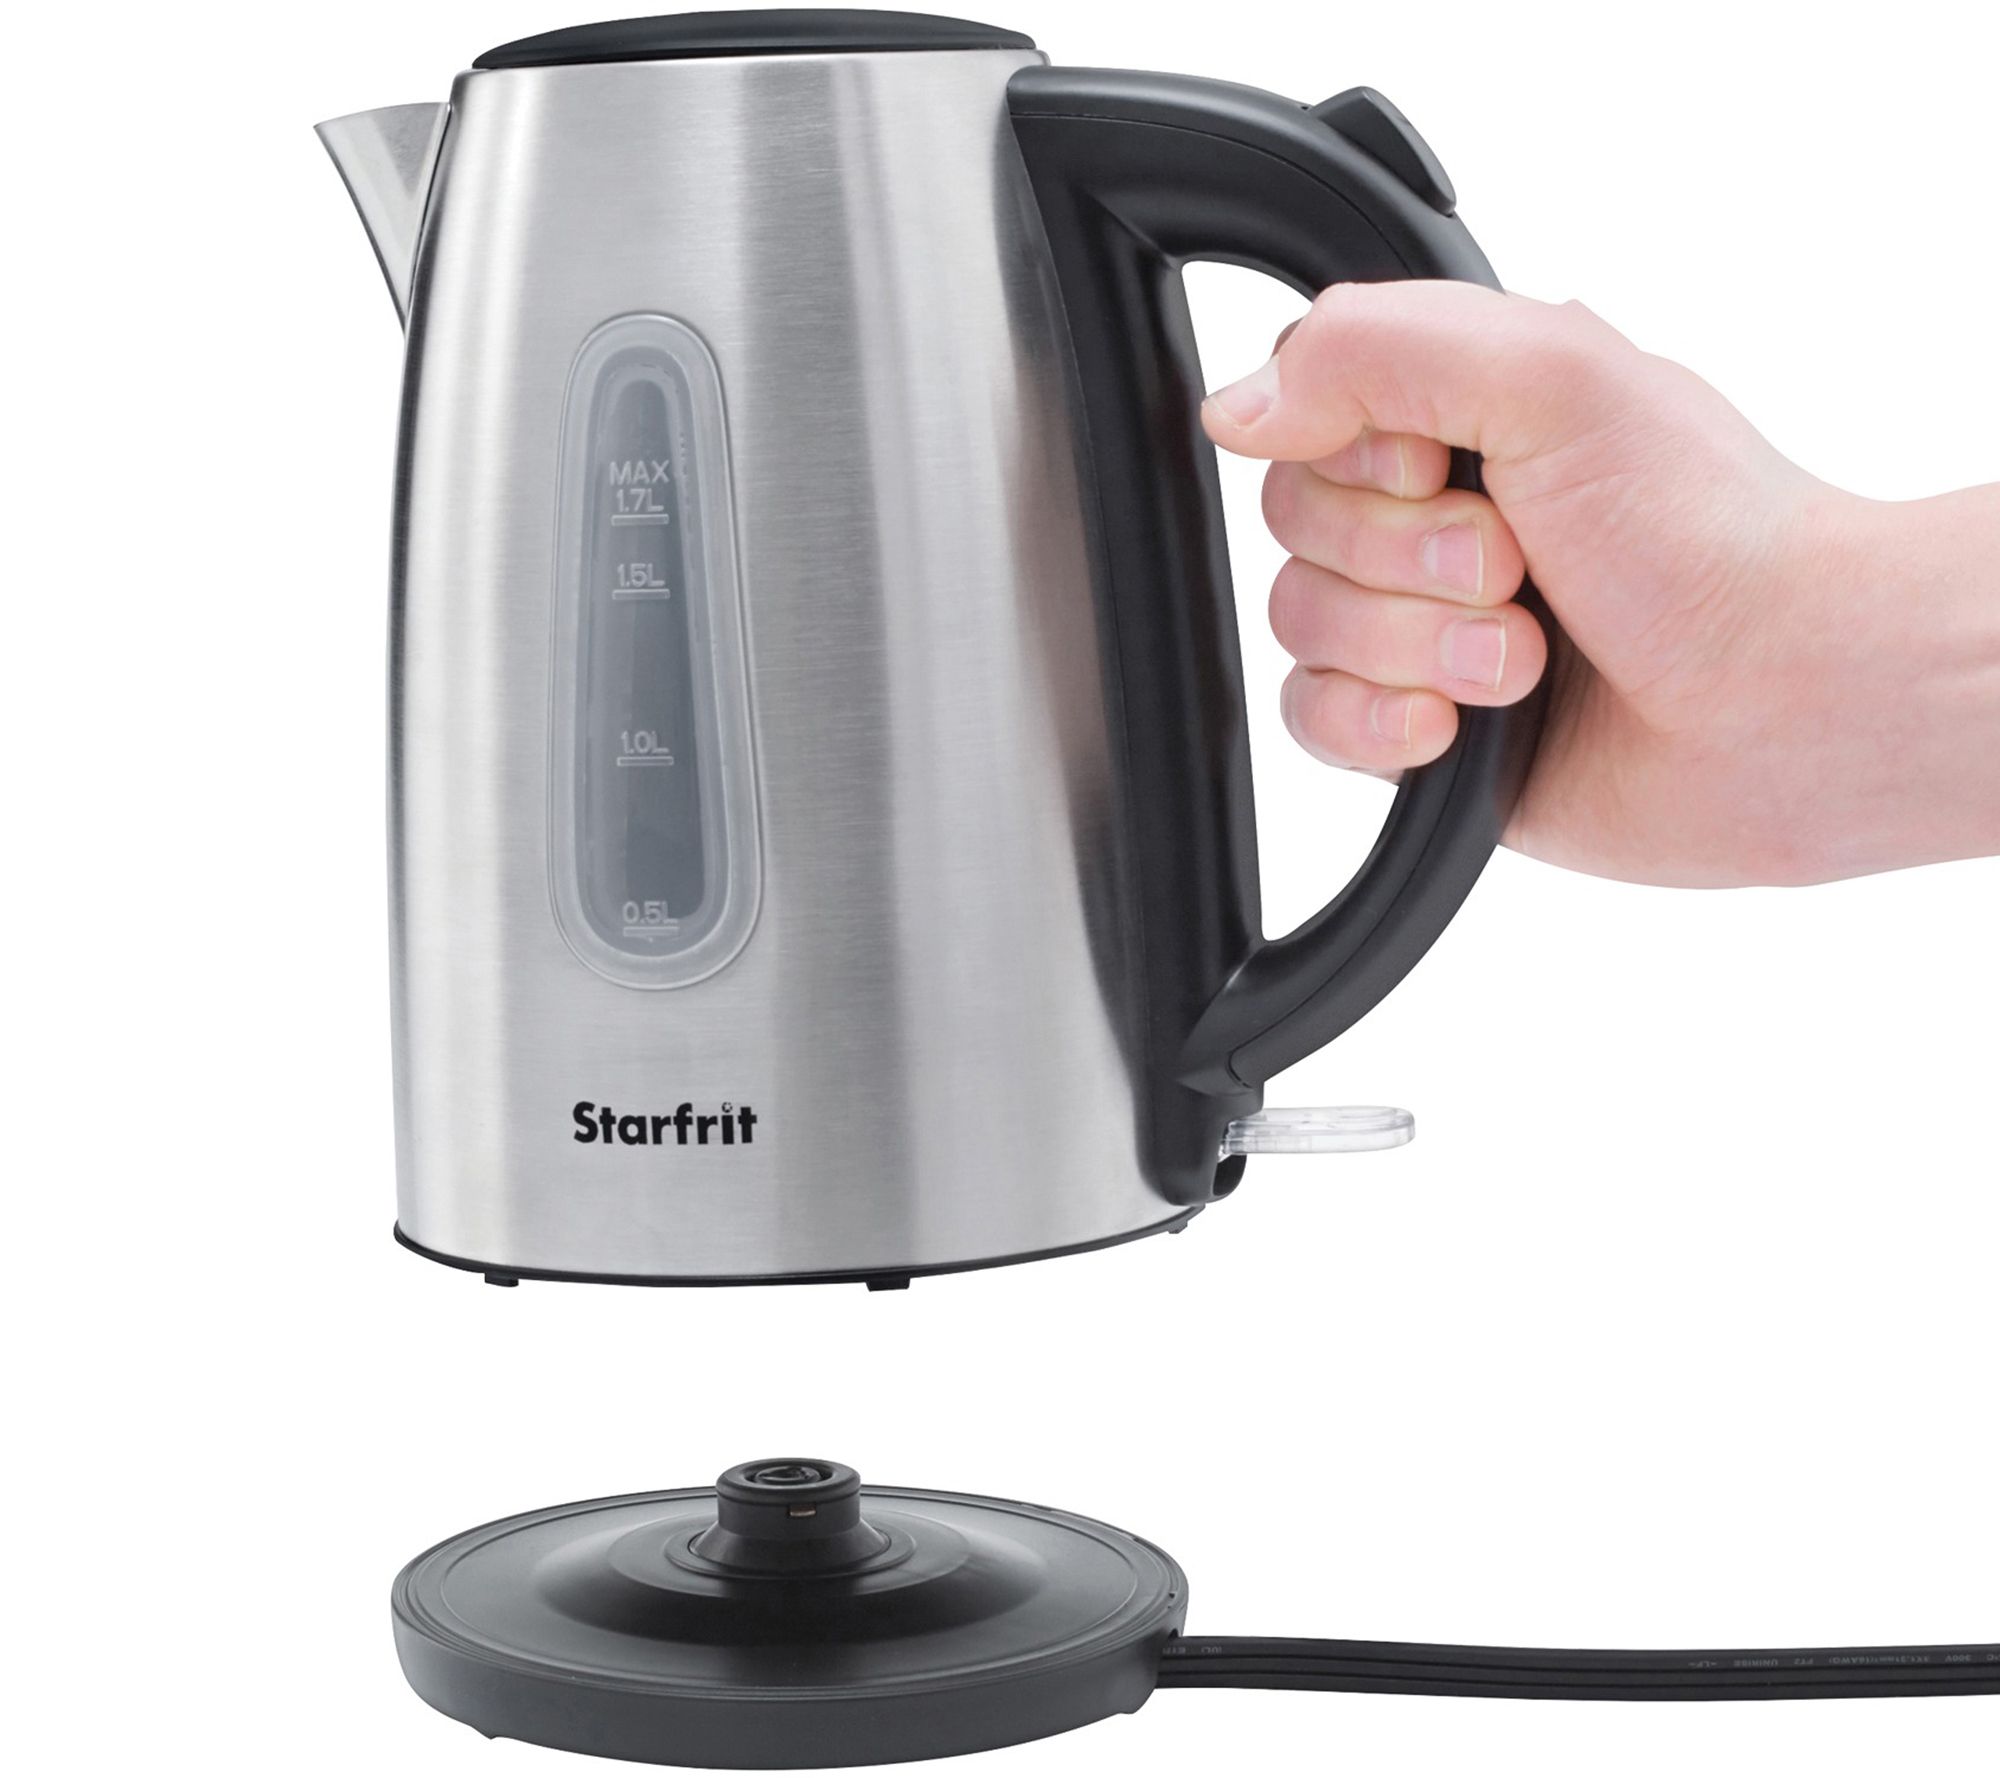 ChefGiant Cordless Electric Tea Kettle - 1.7L Hot Water Kettle Electric Boiler Made of Glass & Stainless Steel - Large Capacity Water Boiler Heater